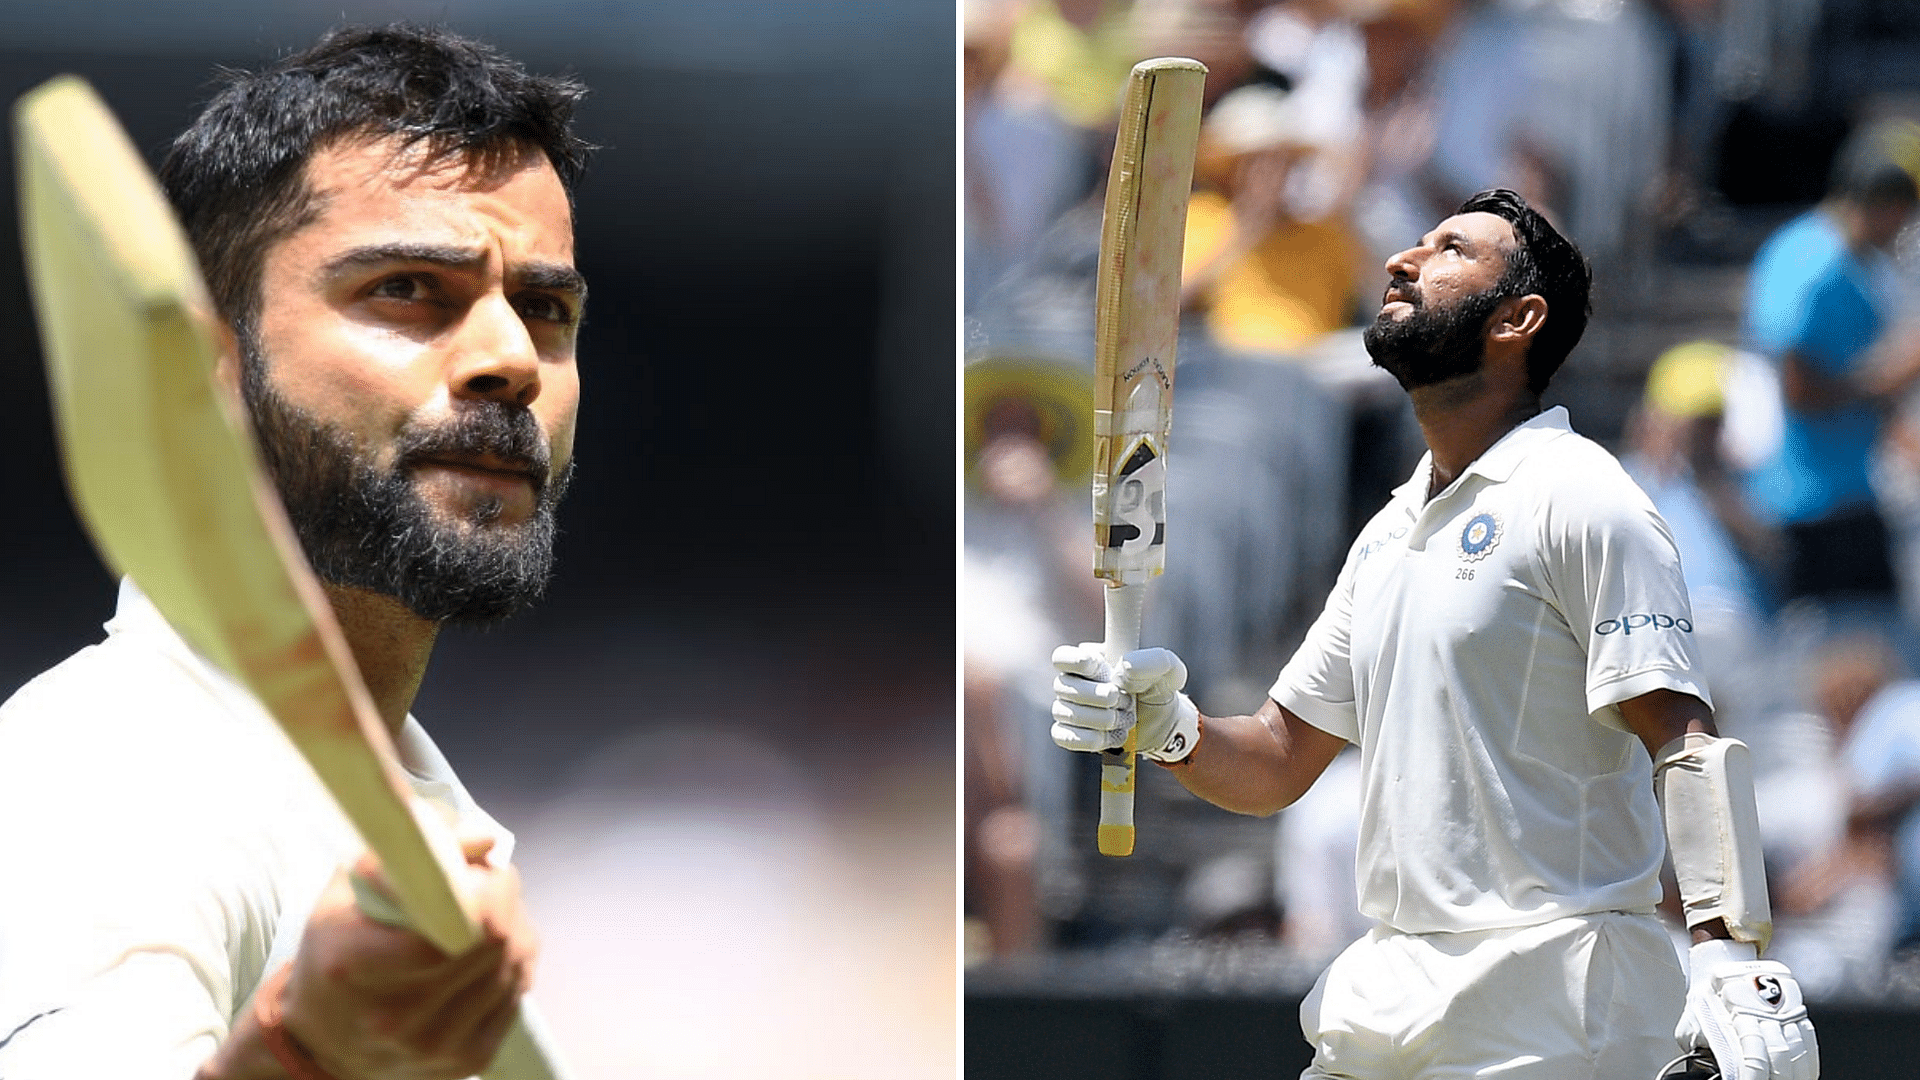 Virat Kohli’s 82 and Cheteshwar Pujara’s 106 led India to a sizeable first innings total of 443/7 on Day 2 of the Melbourne Test.